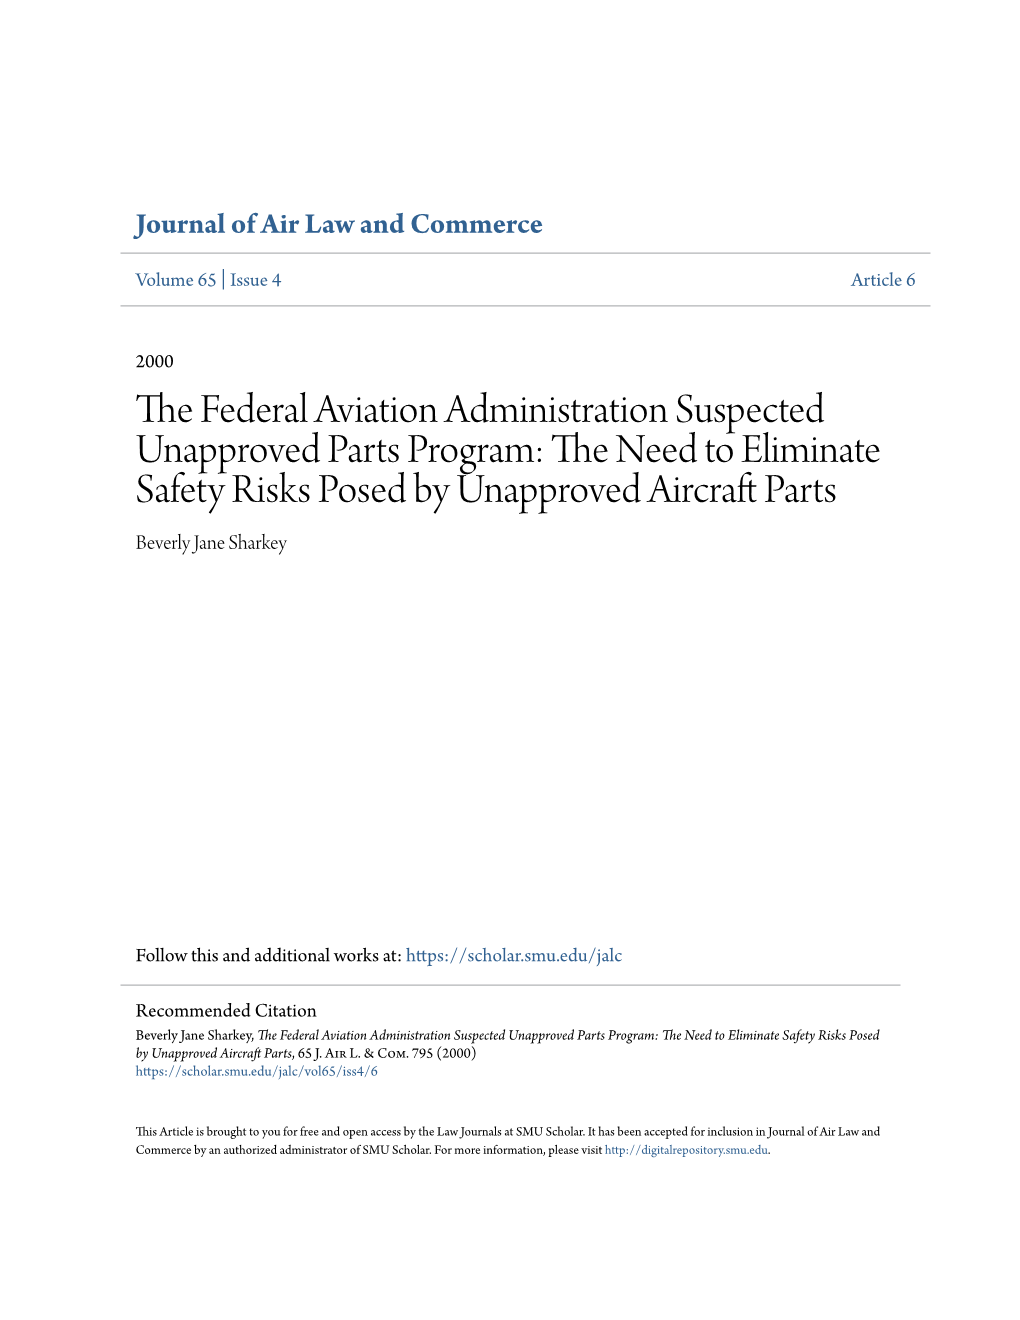 The Federal Aviation Administration Suspected Unapproved Parts Program: the Need to Eliminate Safety Risks Posed by Unapproved Aircraft Ap Rts, 65 J